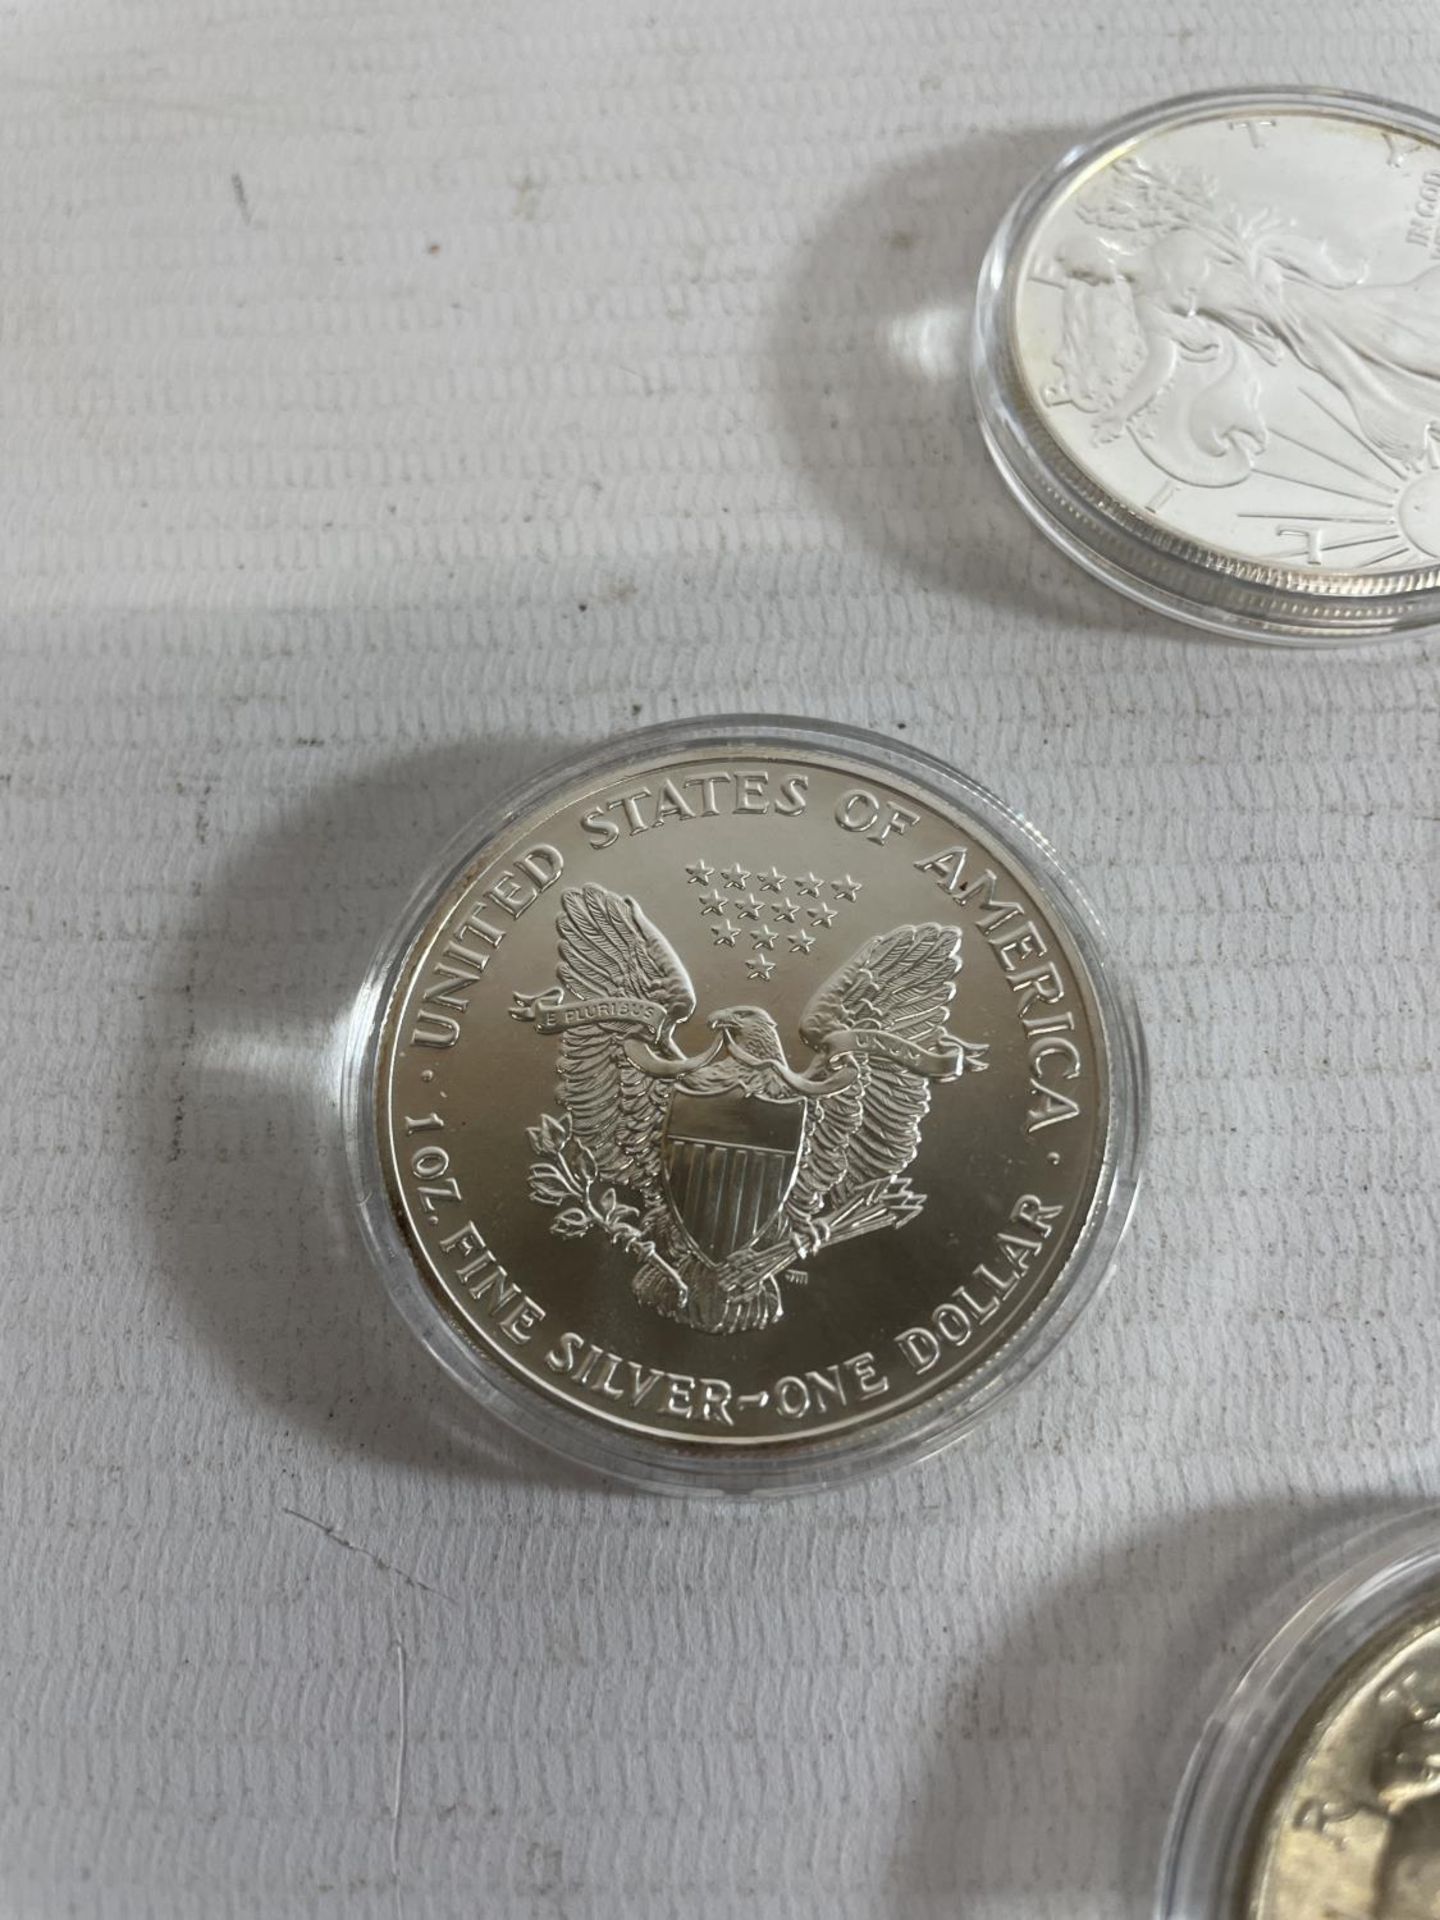 A SELECTION OF 10 USA SILVER $1 COINS , EACH ENCAPSULATED , DATED : 1890, 1922, 1987-8 , 1989 X 2, - Image 2 of 4